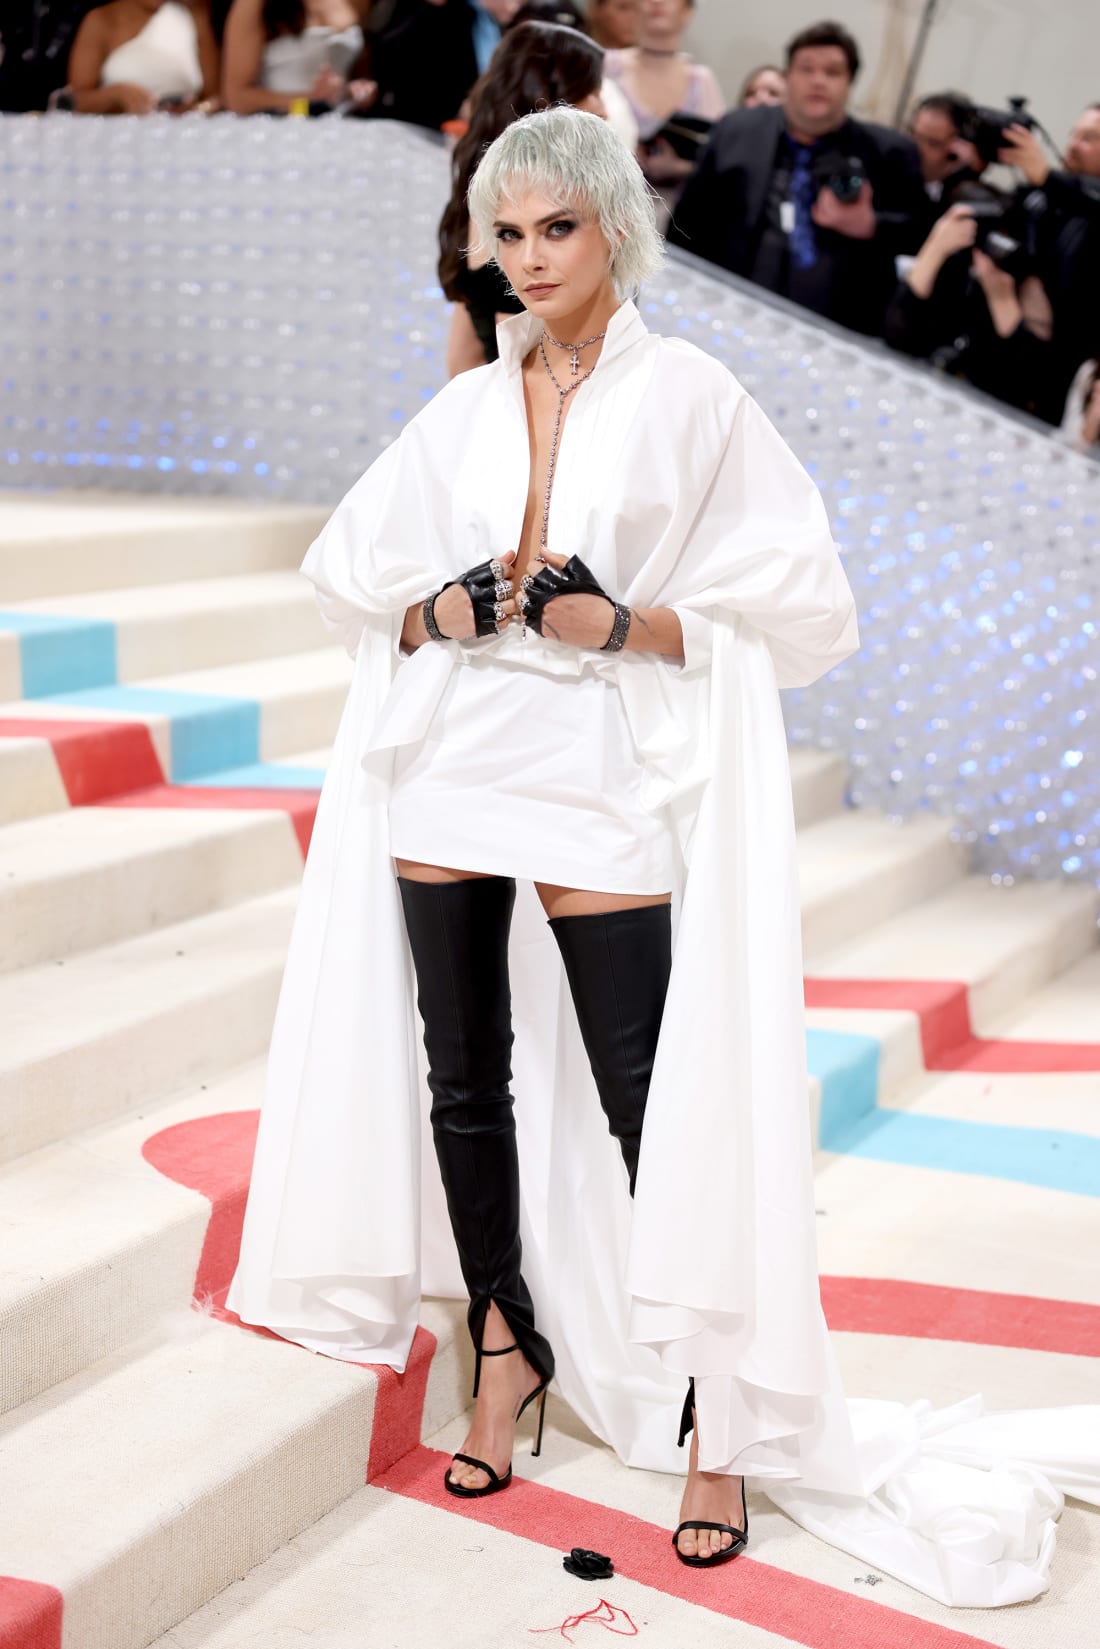 Like many tonight, Cara Delevingne put a spin on Lagerfeld's personal style, wearing fingerless moto gloves and a crisp white shirt from Lagerfeld's eponymous brand.
